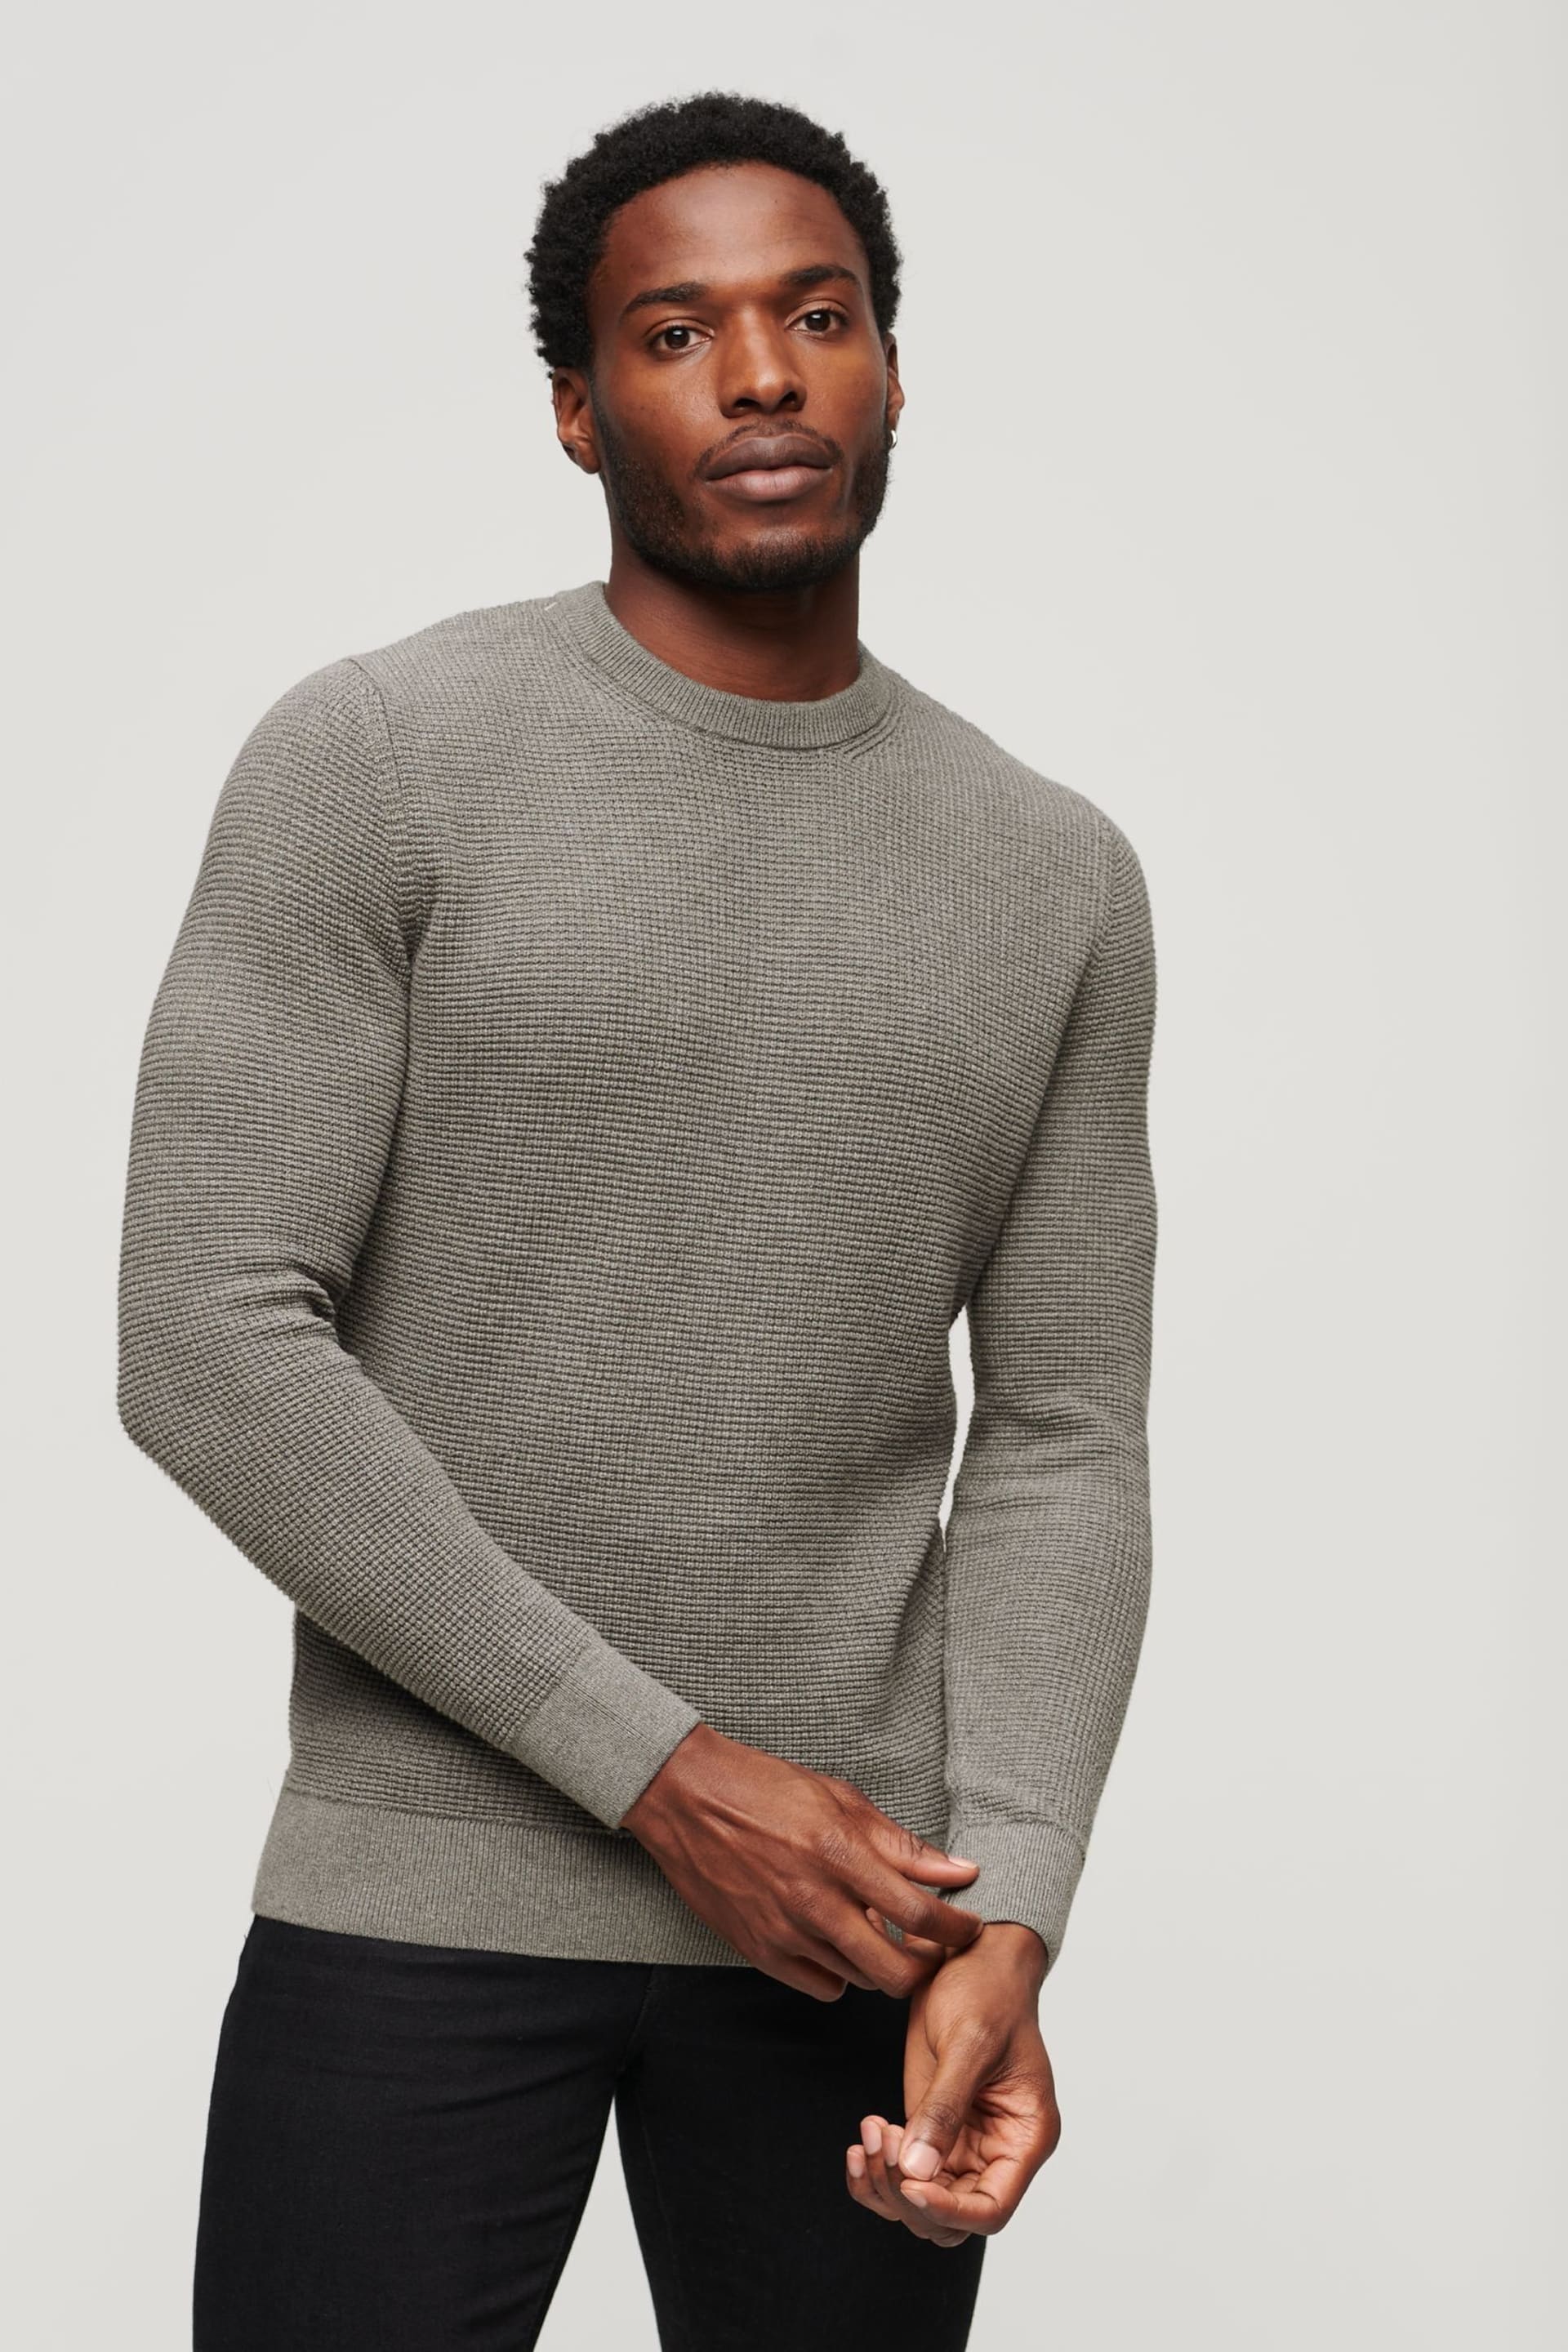 Superdry Grey Textured Crew Knit Jumper - Image 1 of 6